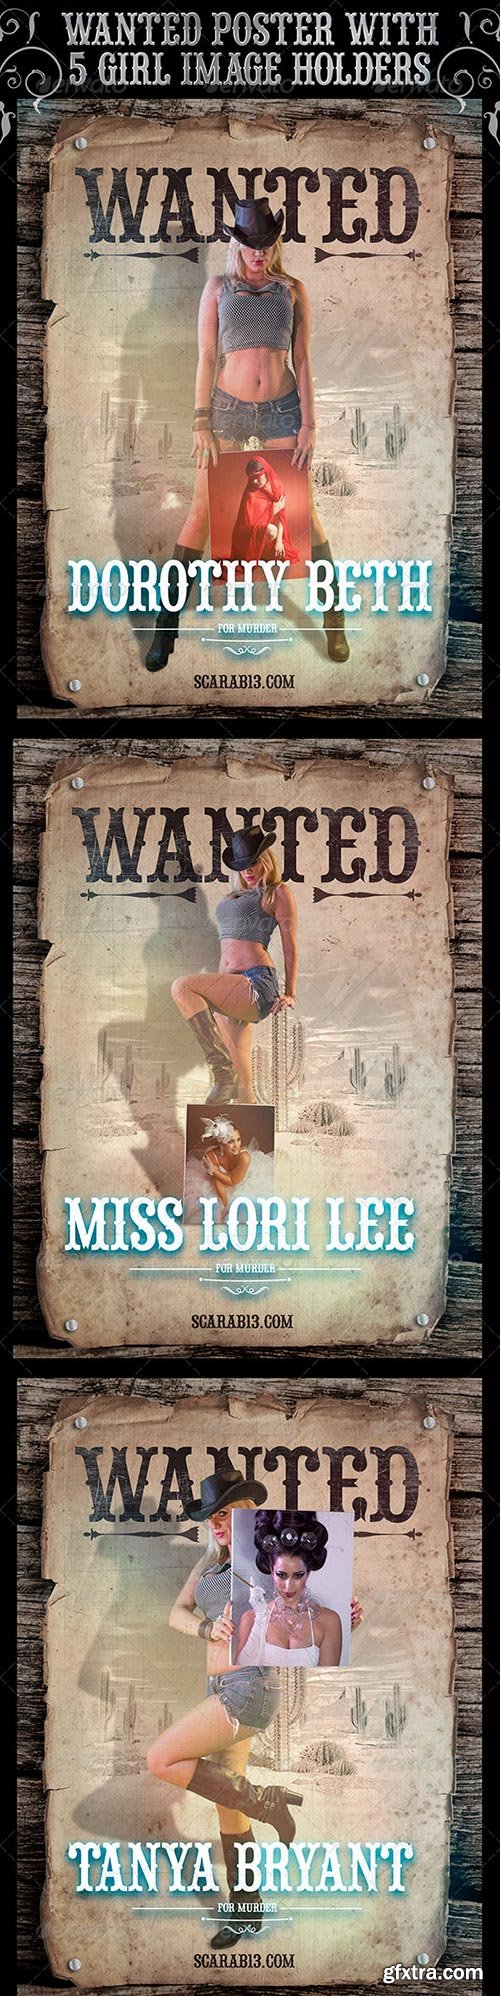 GraphicRiver - Wanted Poster with 5 Cowgirl ImageHolders